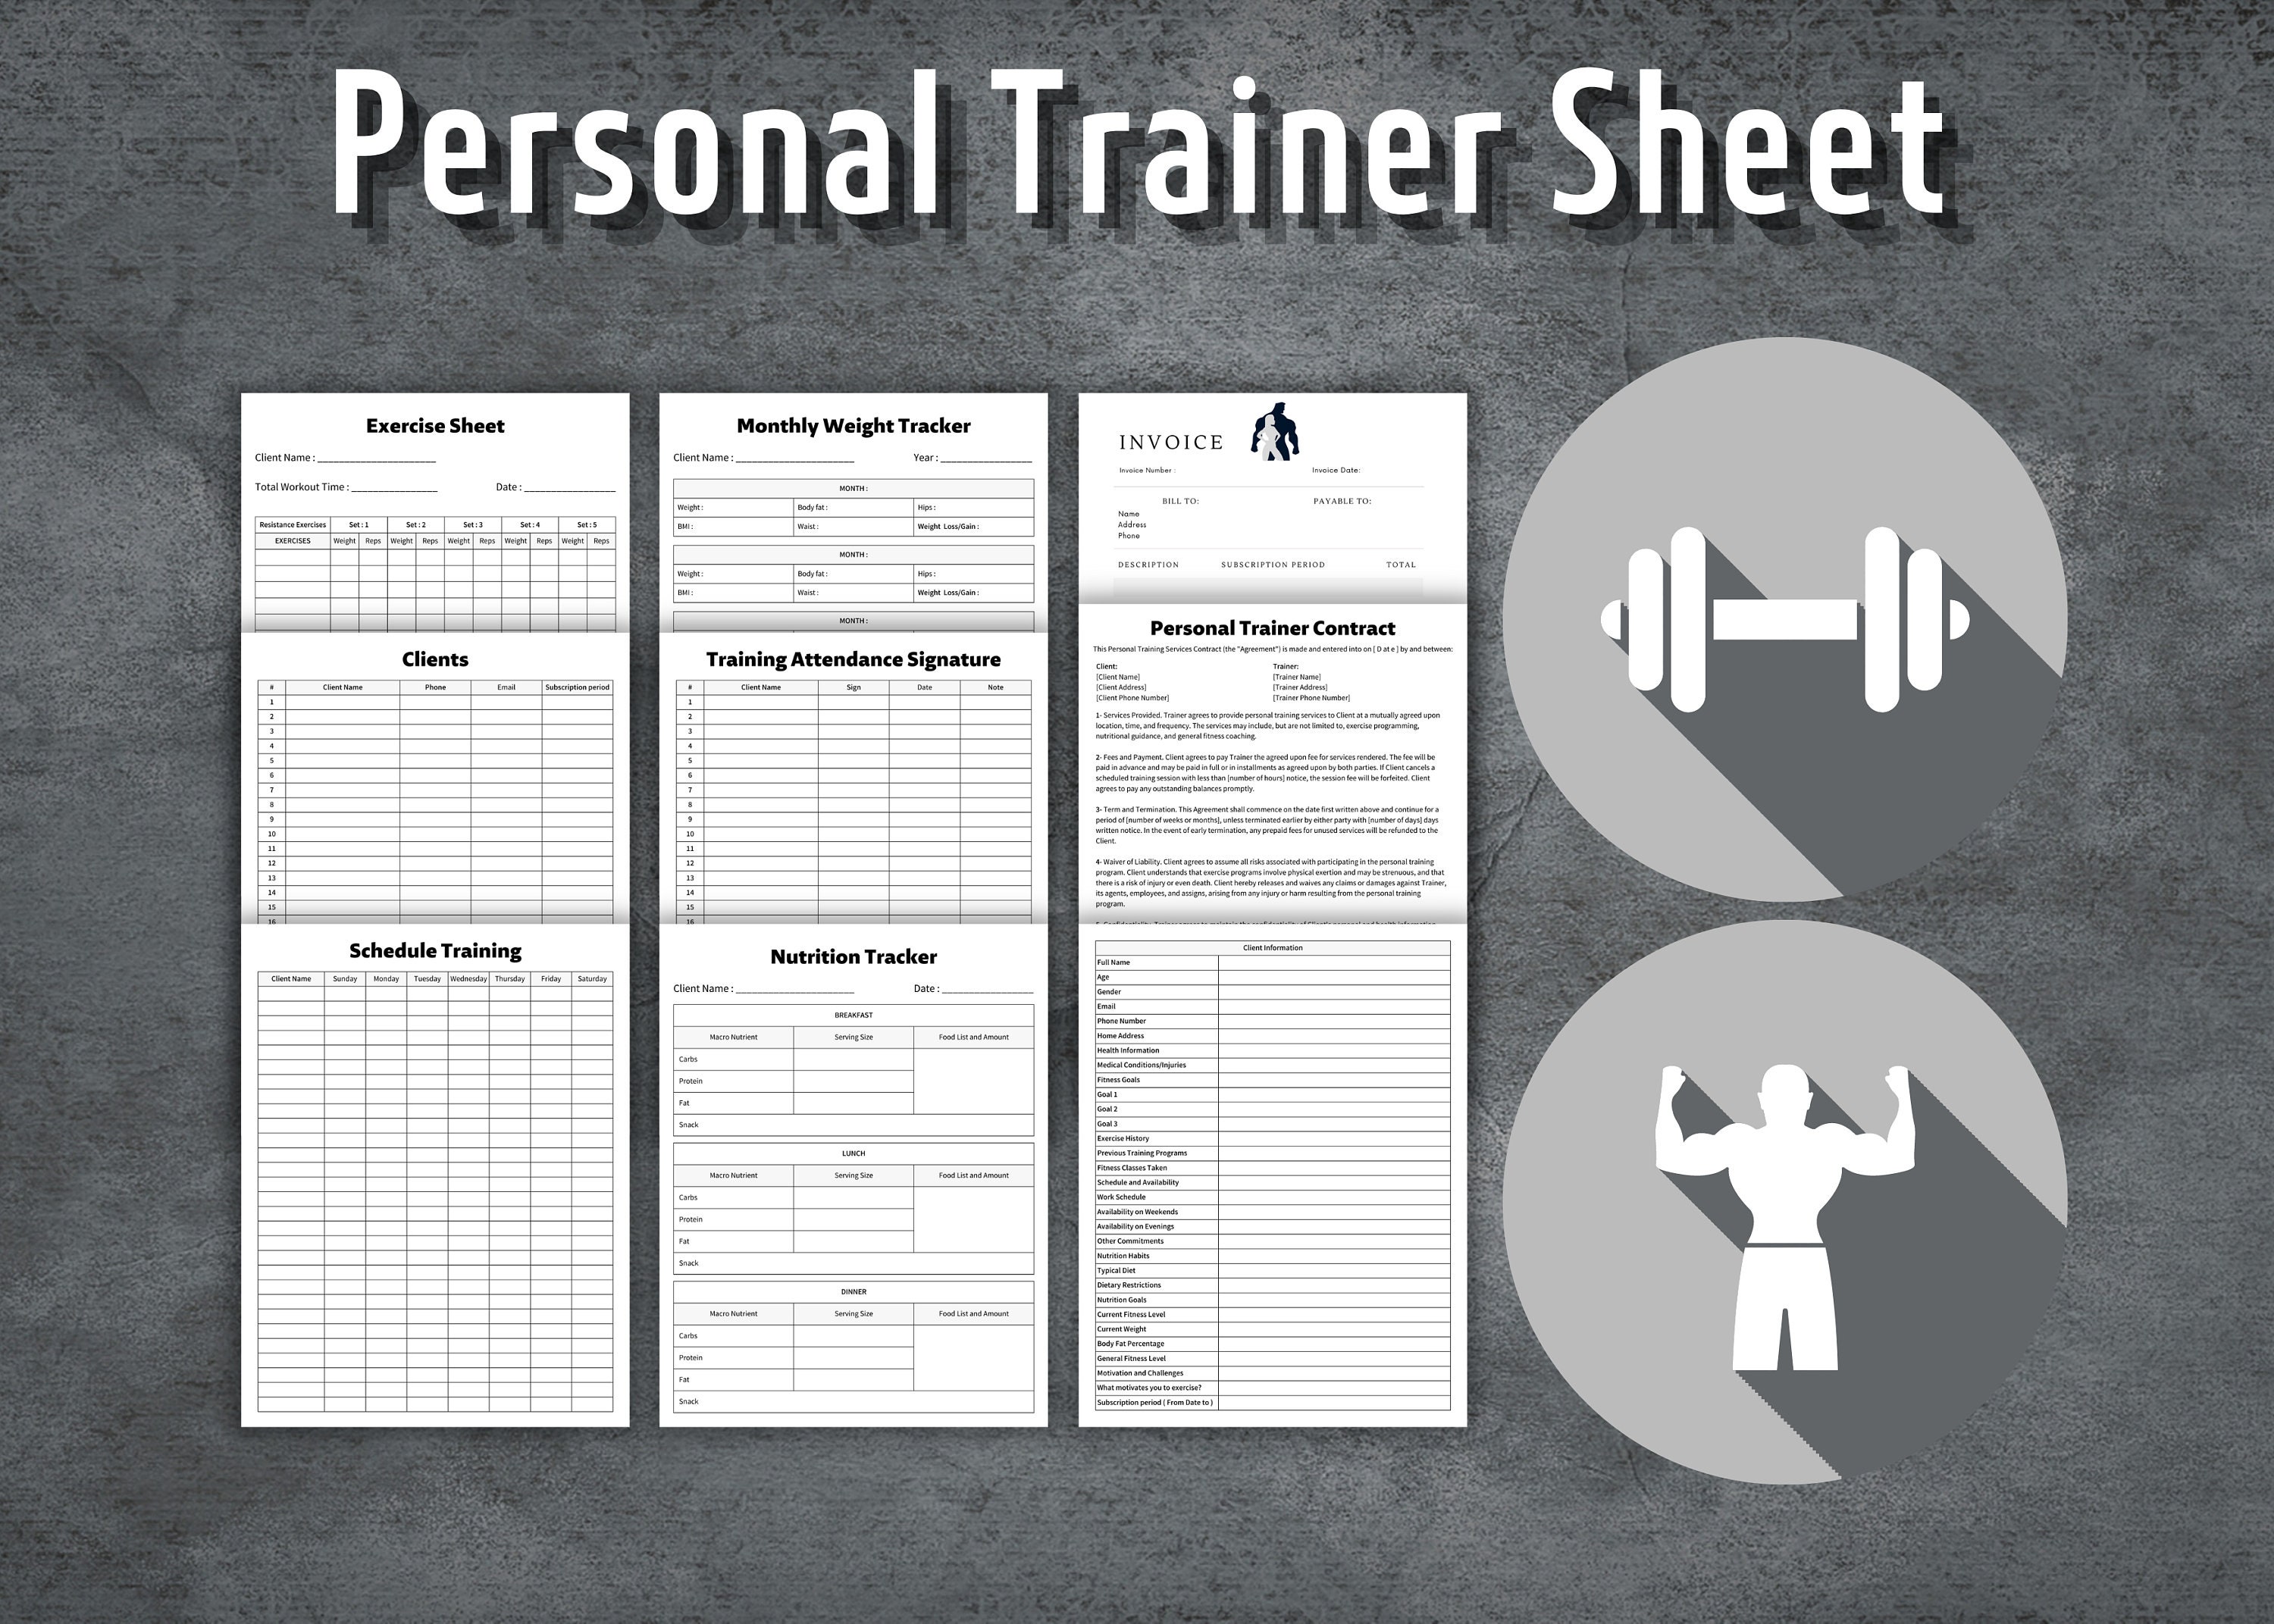 Personal Trainer Sheet, Personal Training Program Template, Fitness Coach,  Training Logs, Personal Trainer Client Intake, Instant Download 